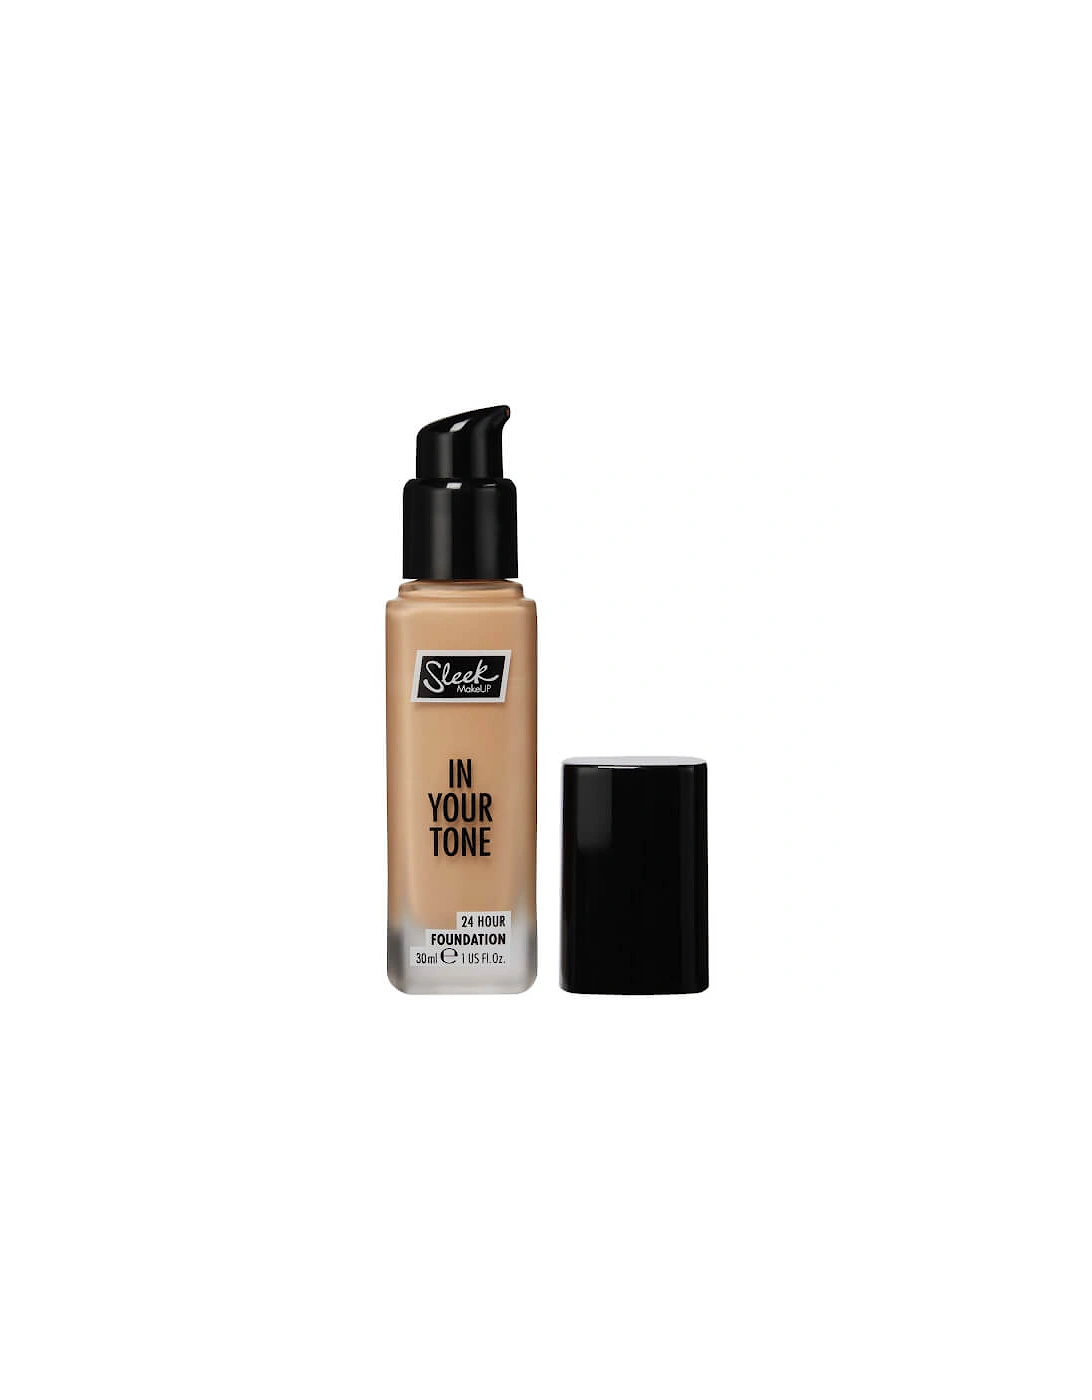 in Your Tone 24 Hour Foundation - 5N, 2 of 1